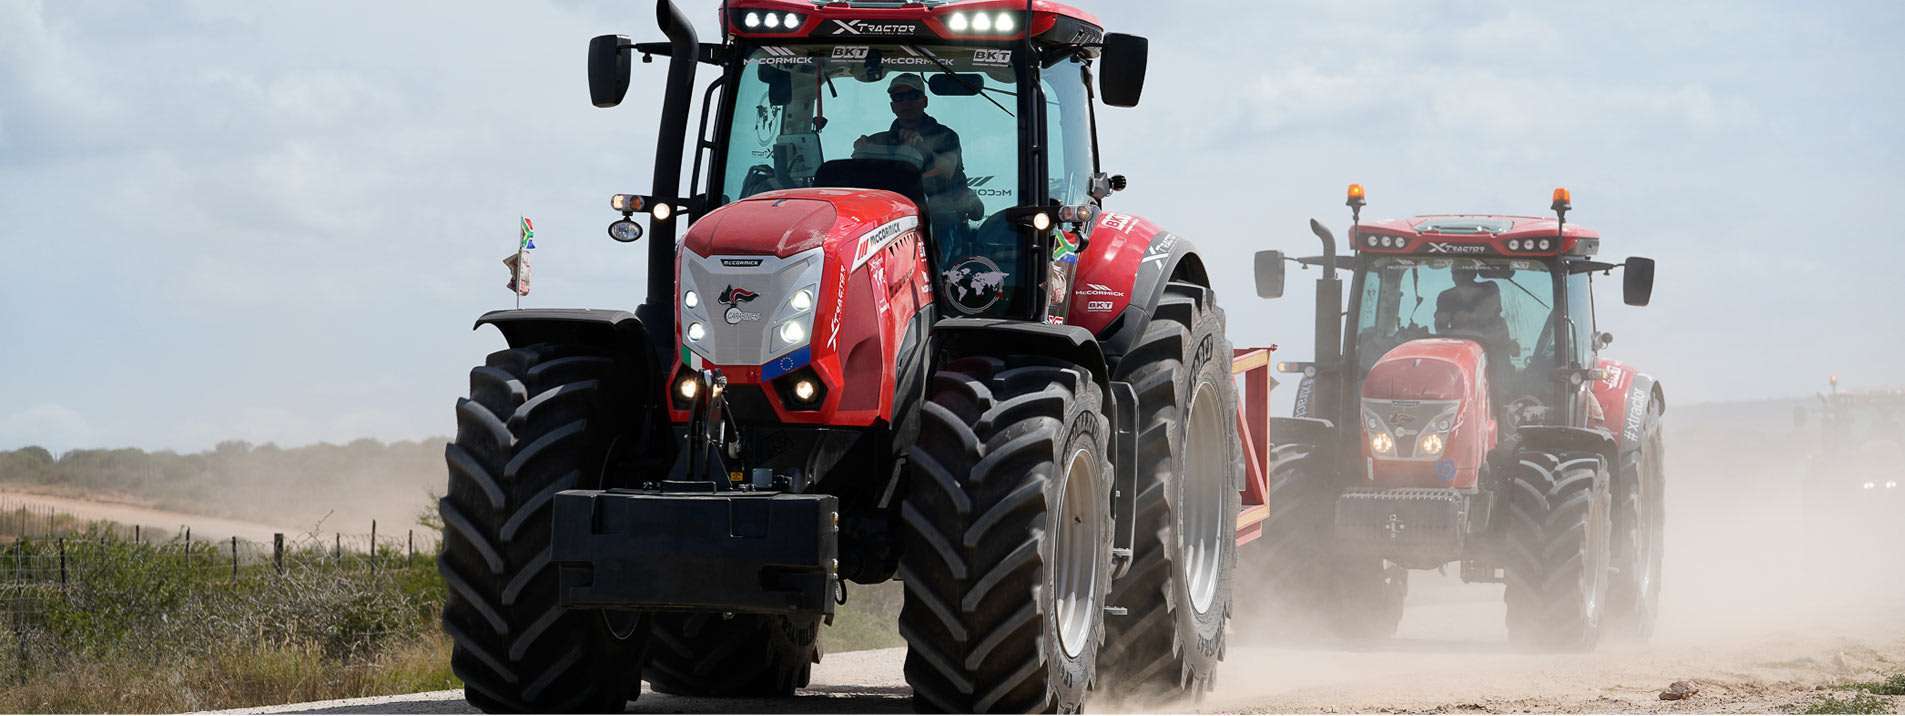 Mccormick Tractors Spare Parts For Sale | Tractor Services Banner